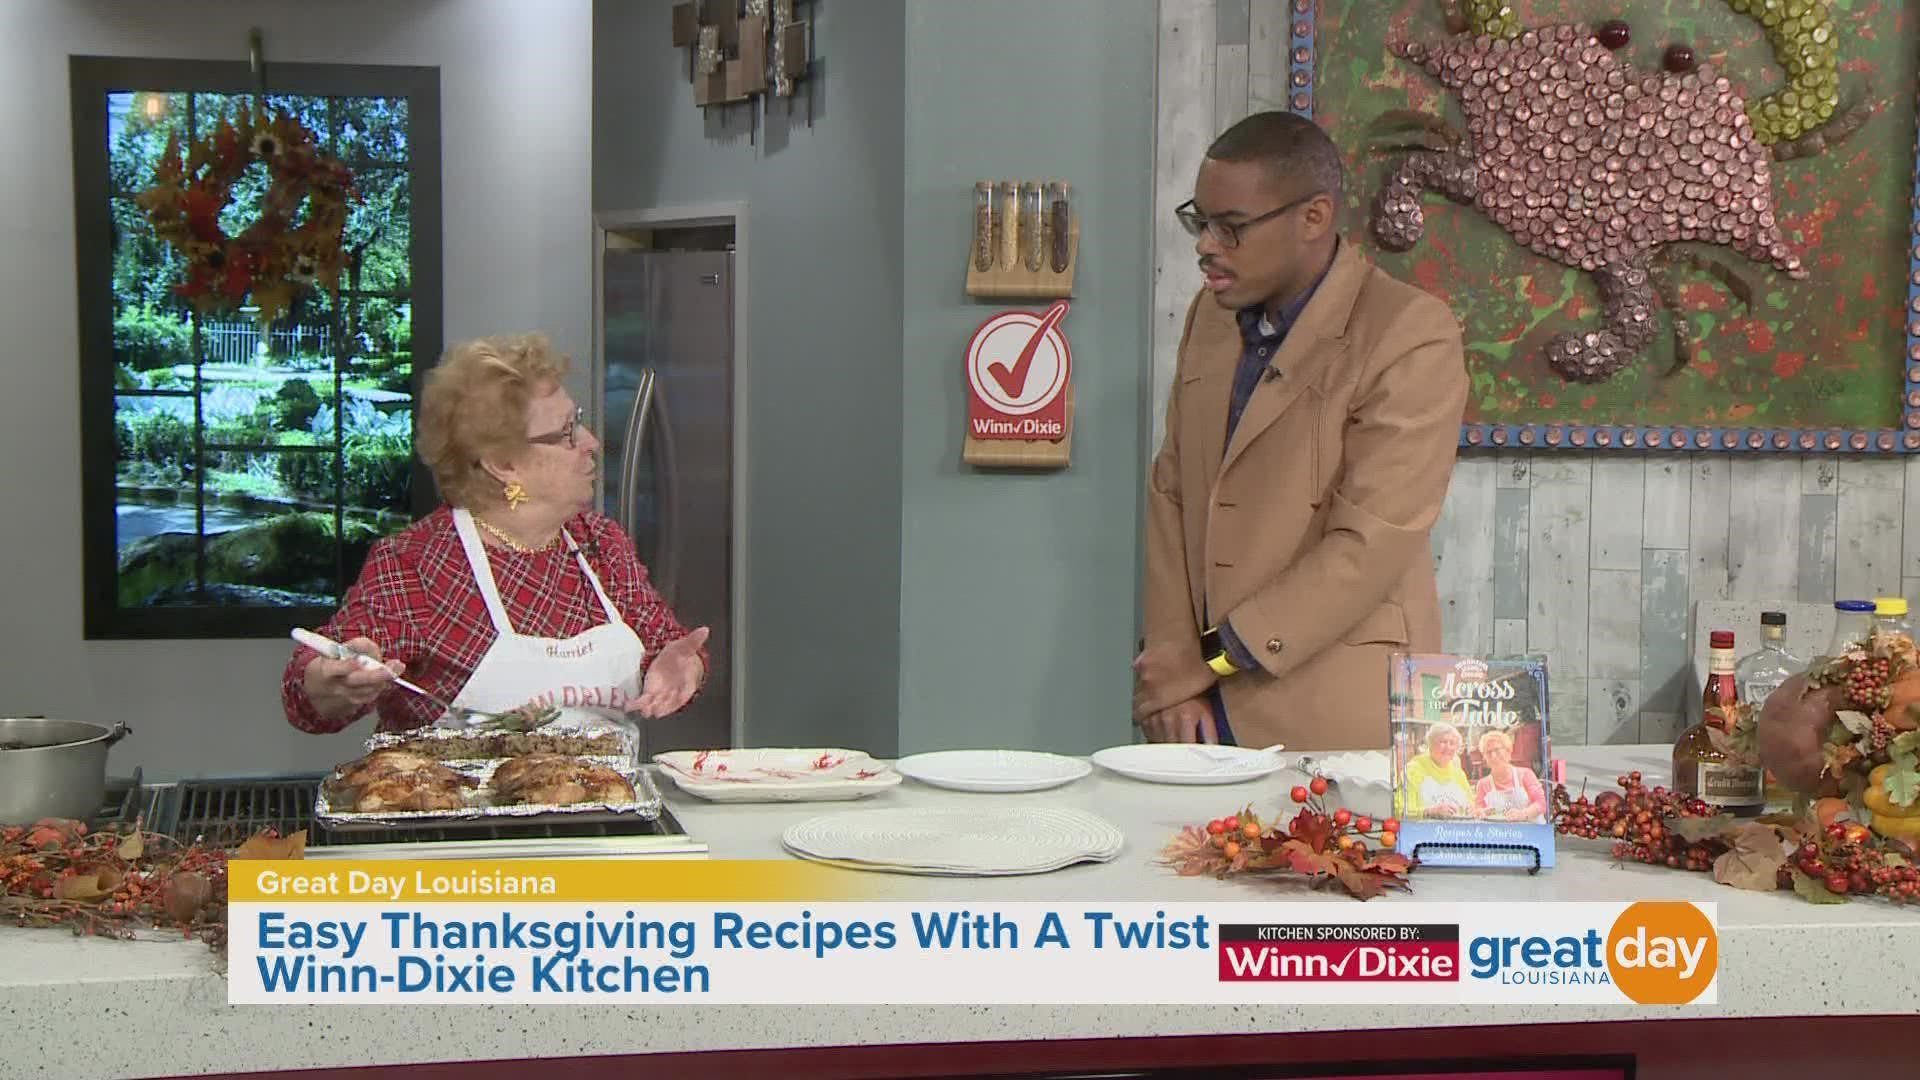 Harriet Robin of the New Orleans School of Cooking shared a recipe for a main dish, side dish and vegetable for Thanksgiving.